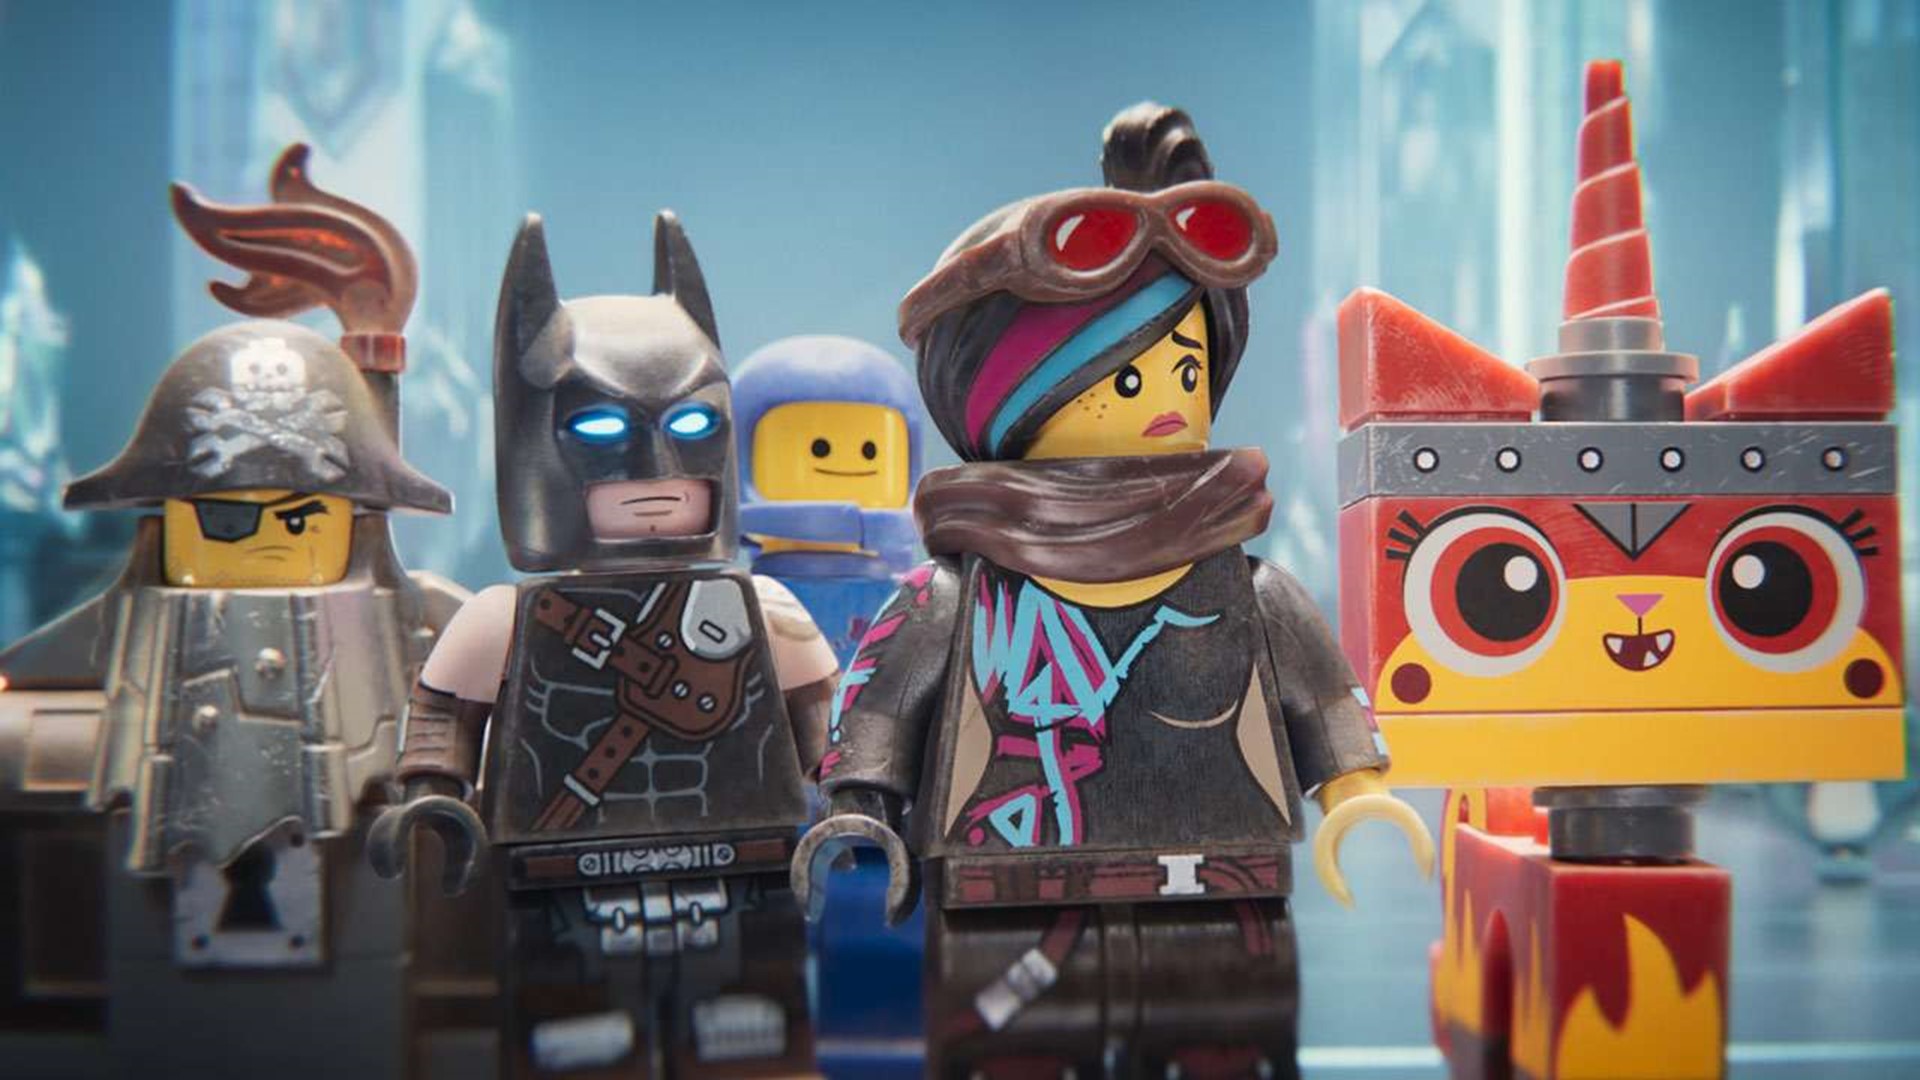 Director's Chair: 'The Lego Movie 2: The Second Part,' 'What Men Want' and 'The Prodigy' join the big screen this weekend. Director Shawn Hobbs also has details on new content on Netflix and on demand.